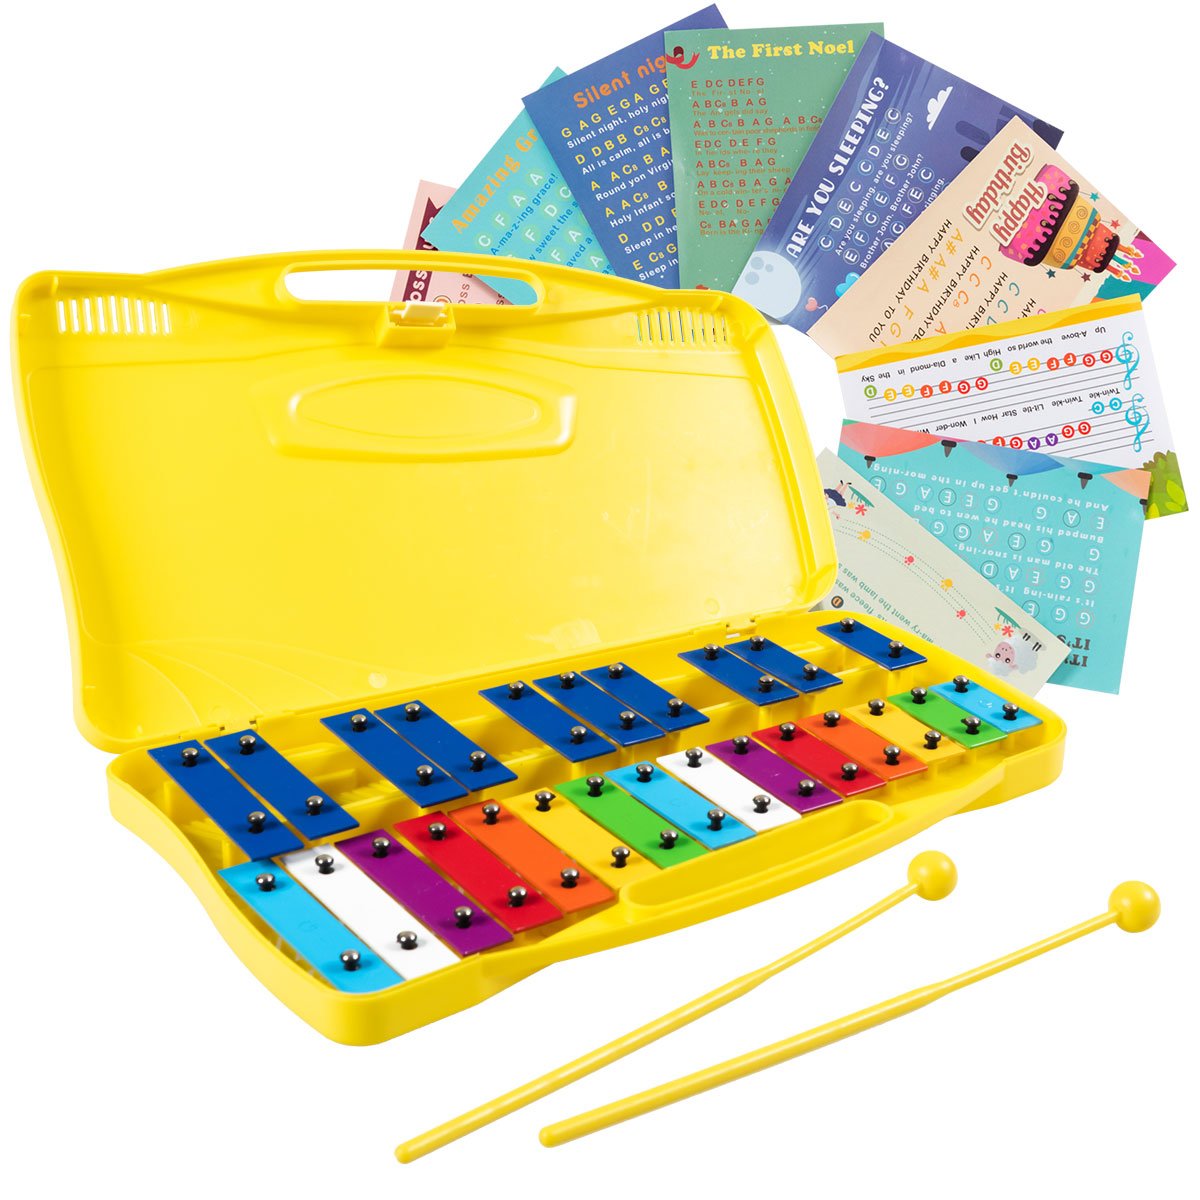 Sunny Serenades: 25 Note Xylophone with Suitcase for Kids Yellow